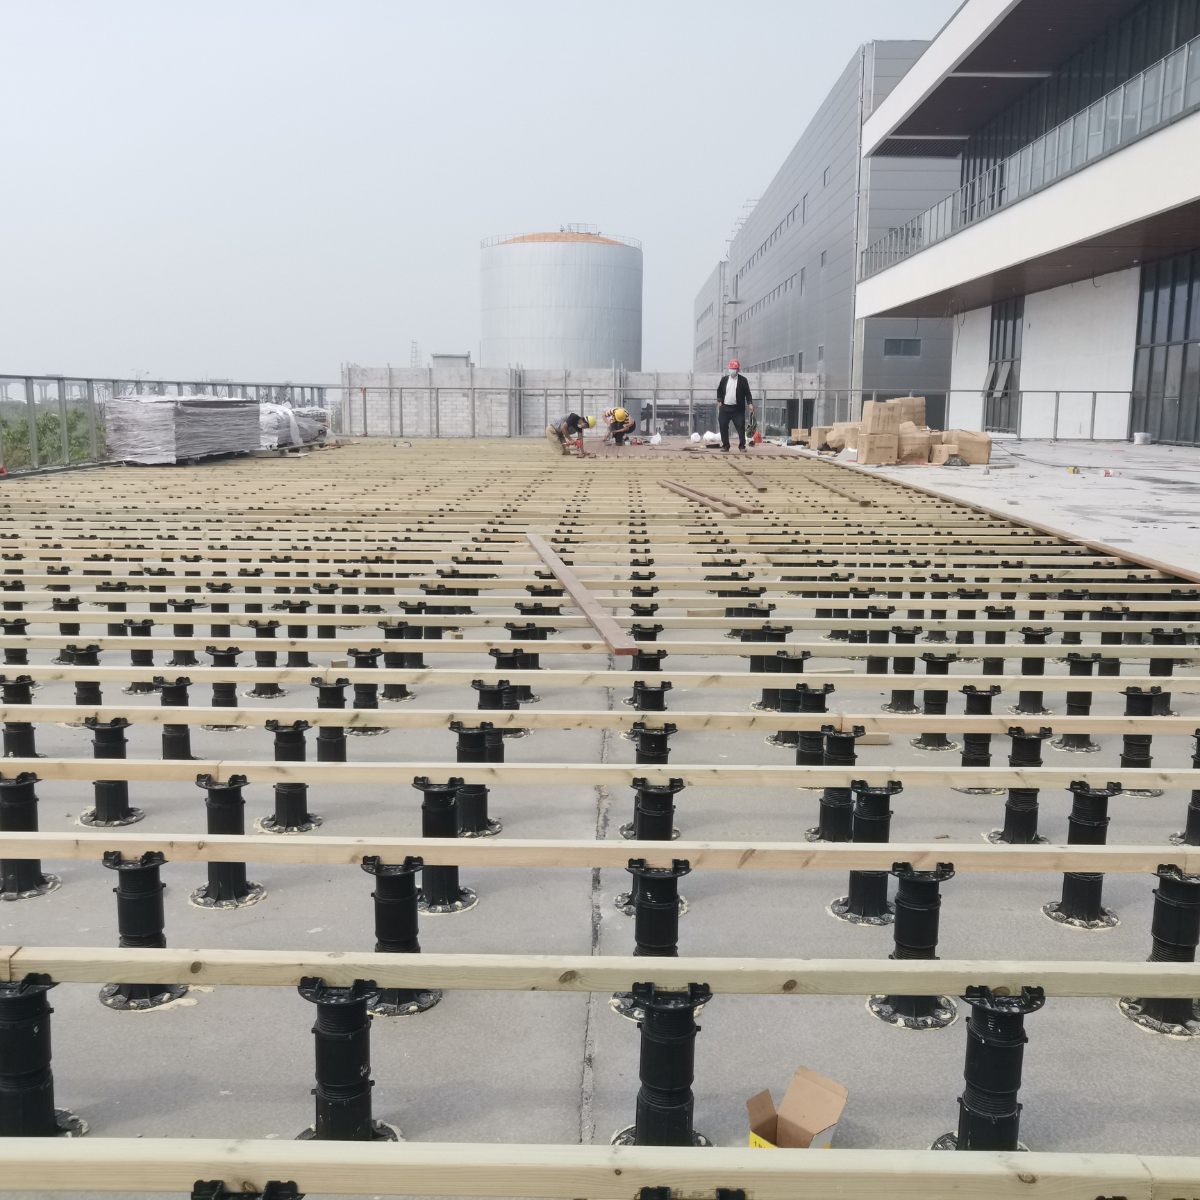 Keel adjustable support Anticorrosive wood floor support Stone tile paving The roof balcony is built with wooden platform